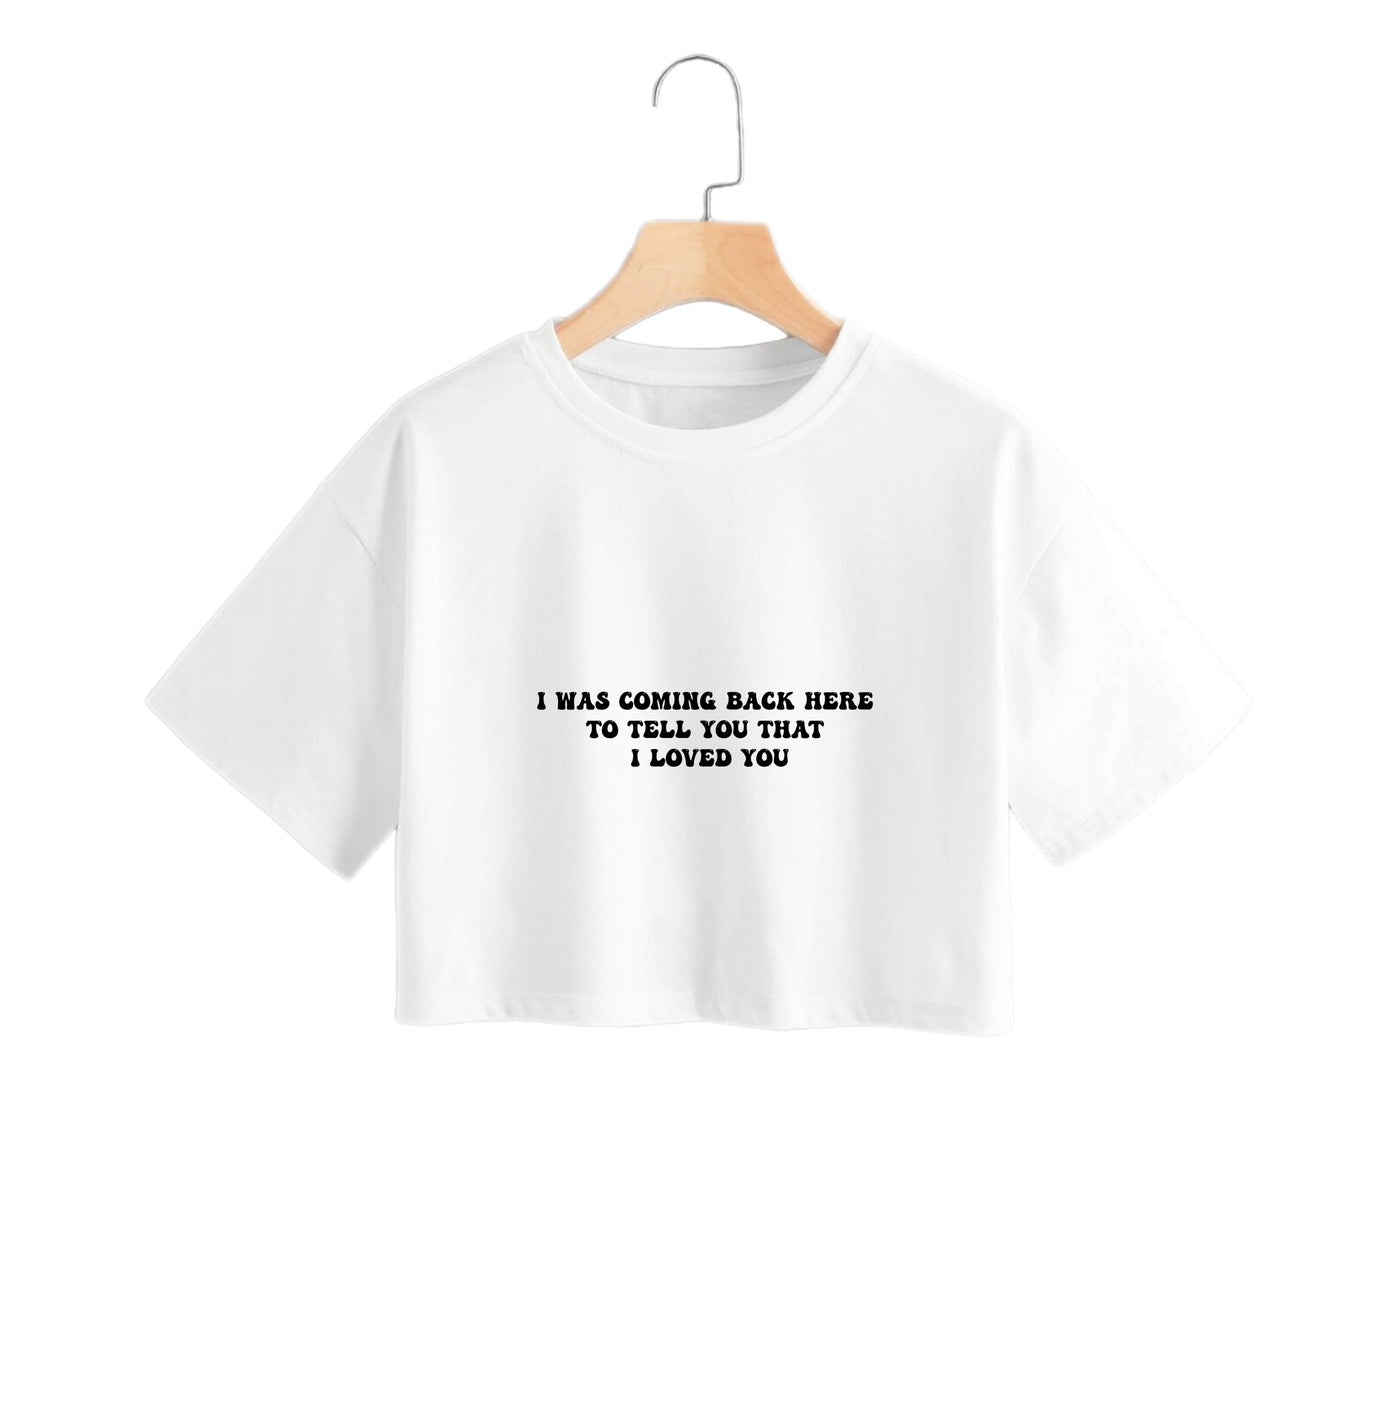 I Was Coming Back Here To Tell You That I Loved You - Islanders Crop Top